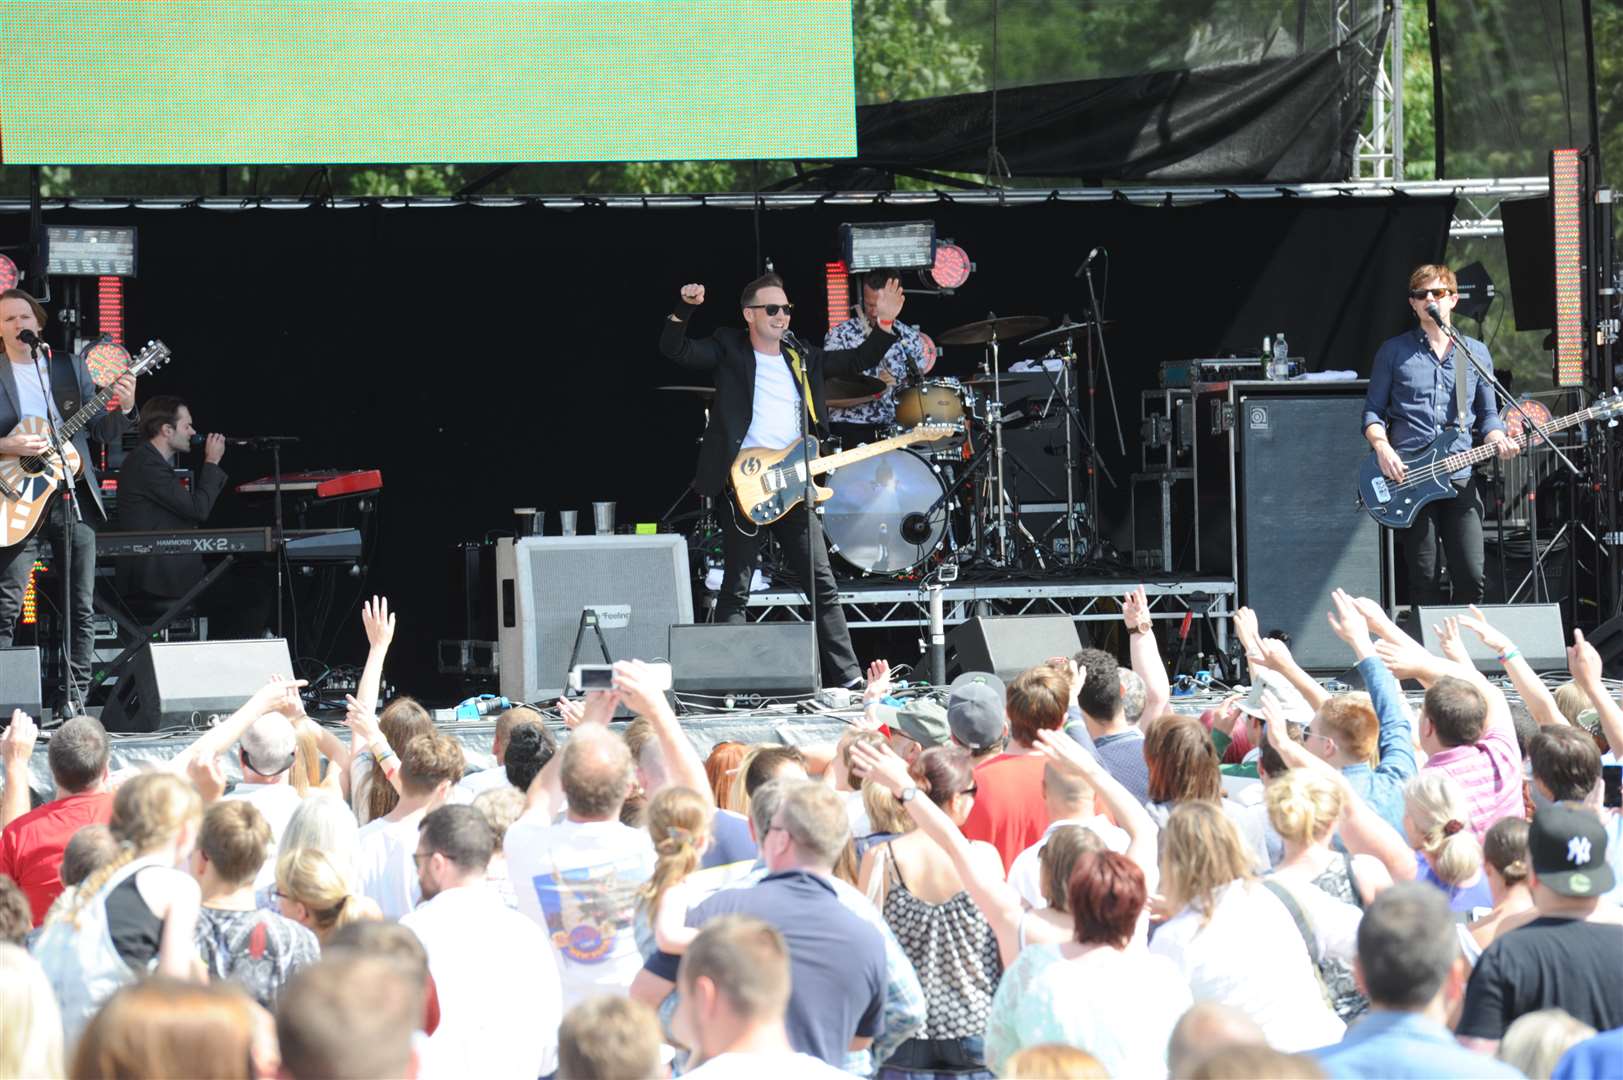 The Dartford Festival has grown from strength to strength.